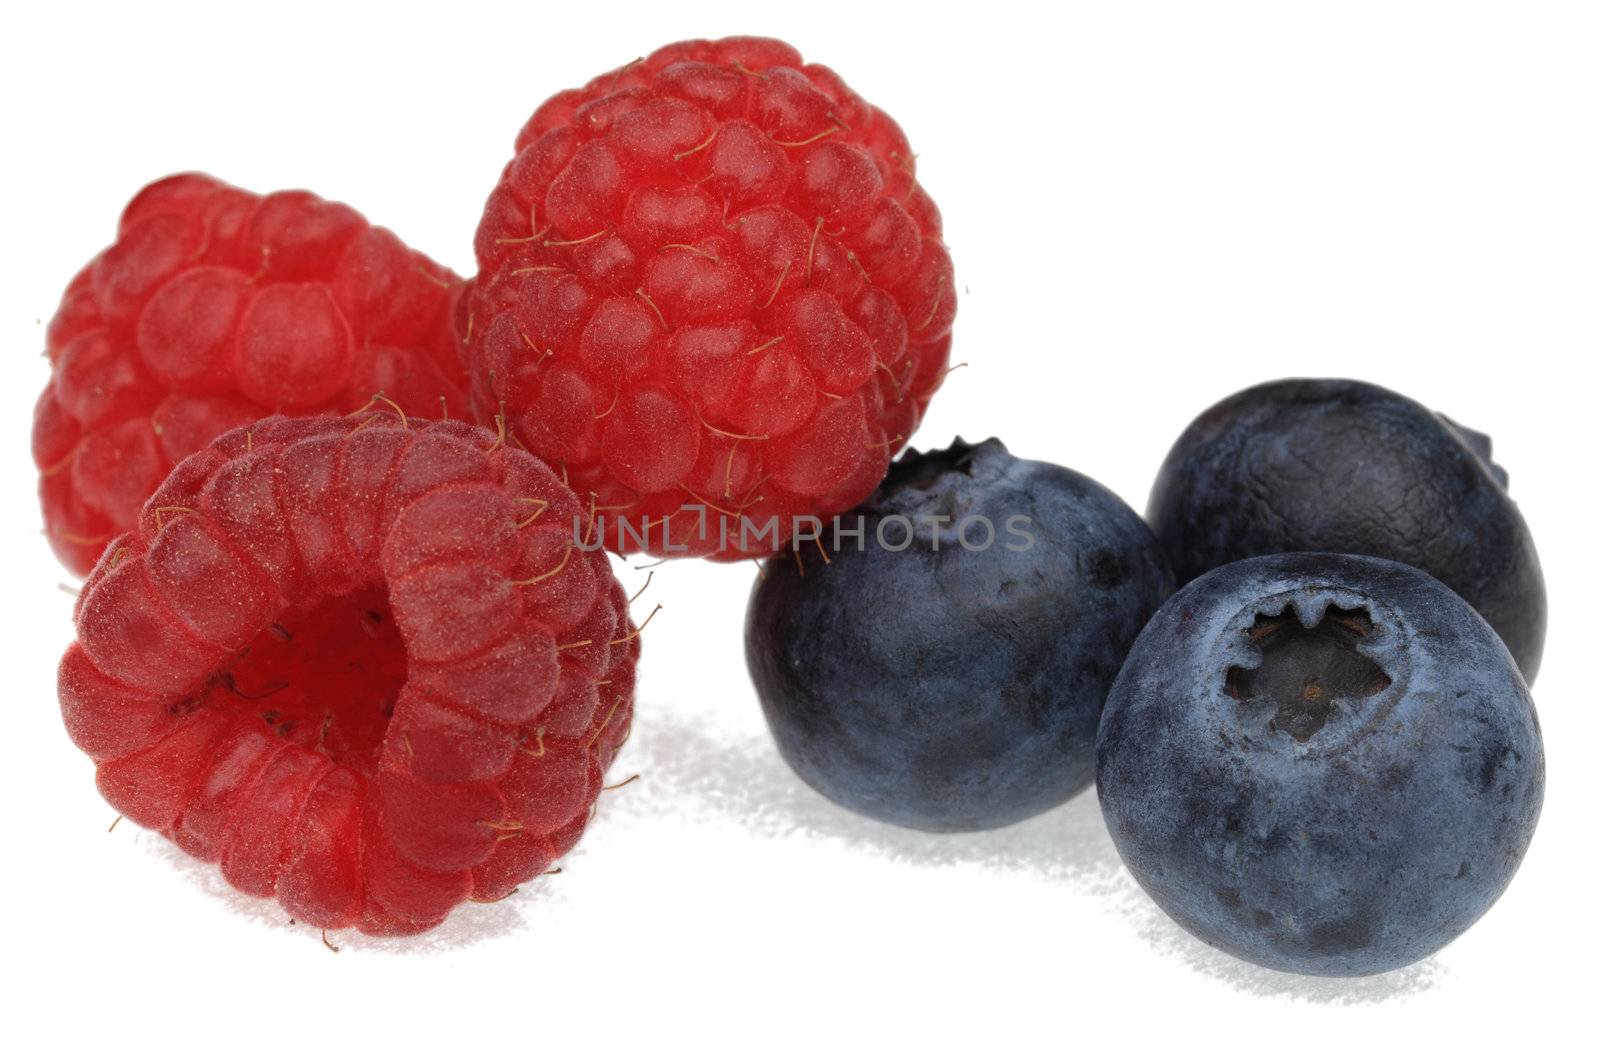 Image of blueberries and raspberries photographed in a studio against a white background.